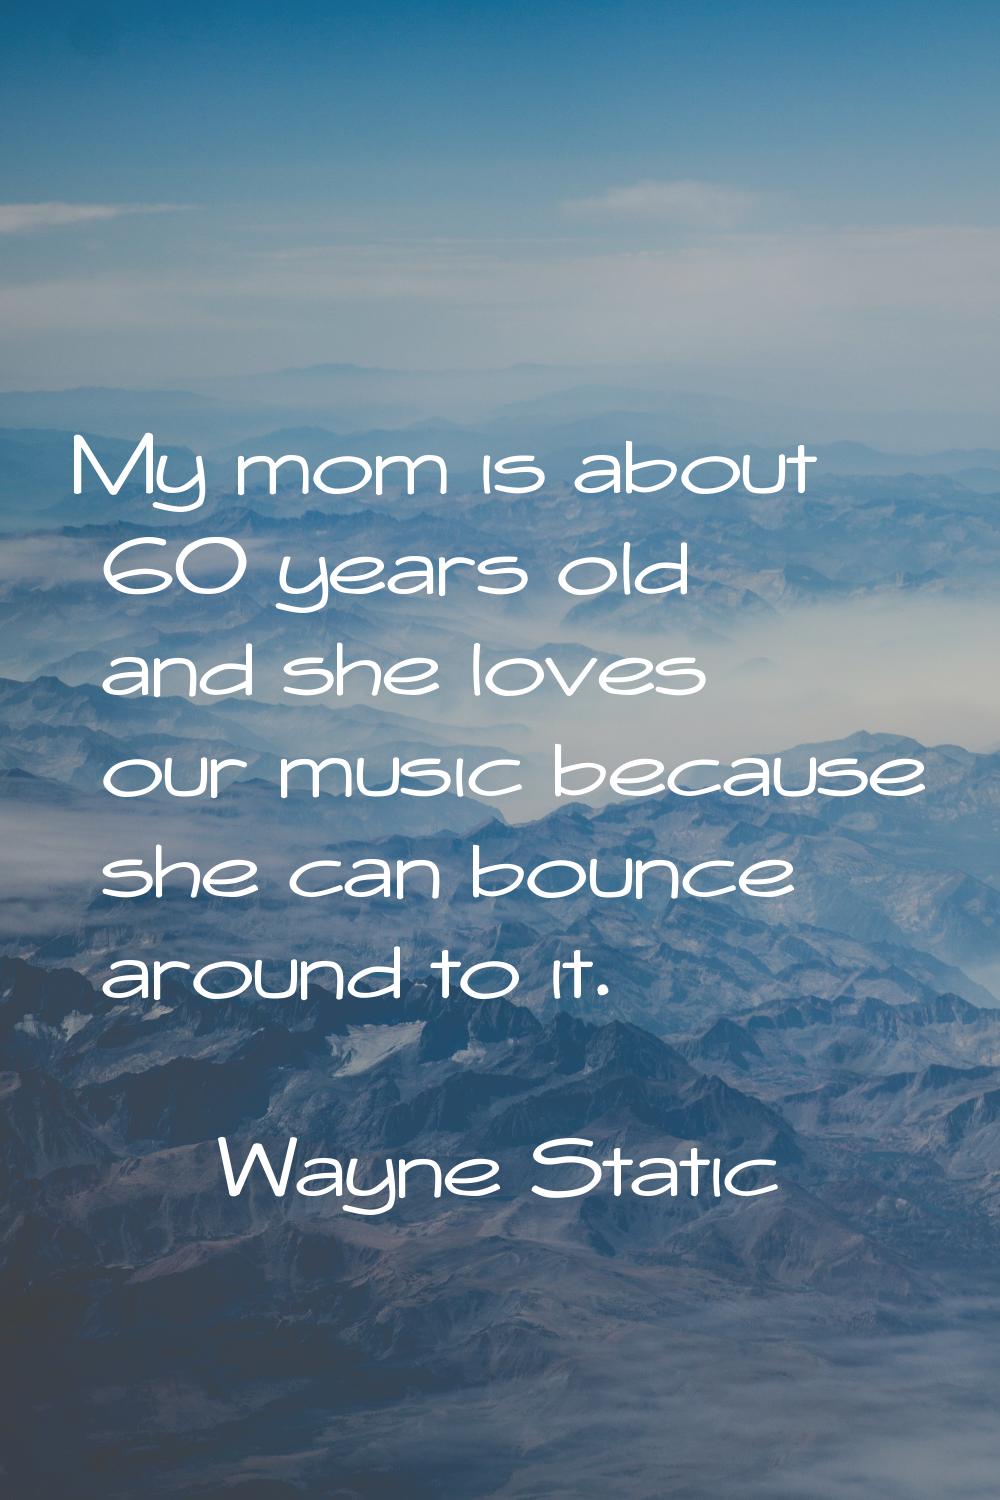 My mom is about 60 years old and she loves our music because she can bounce around to it.